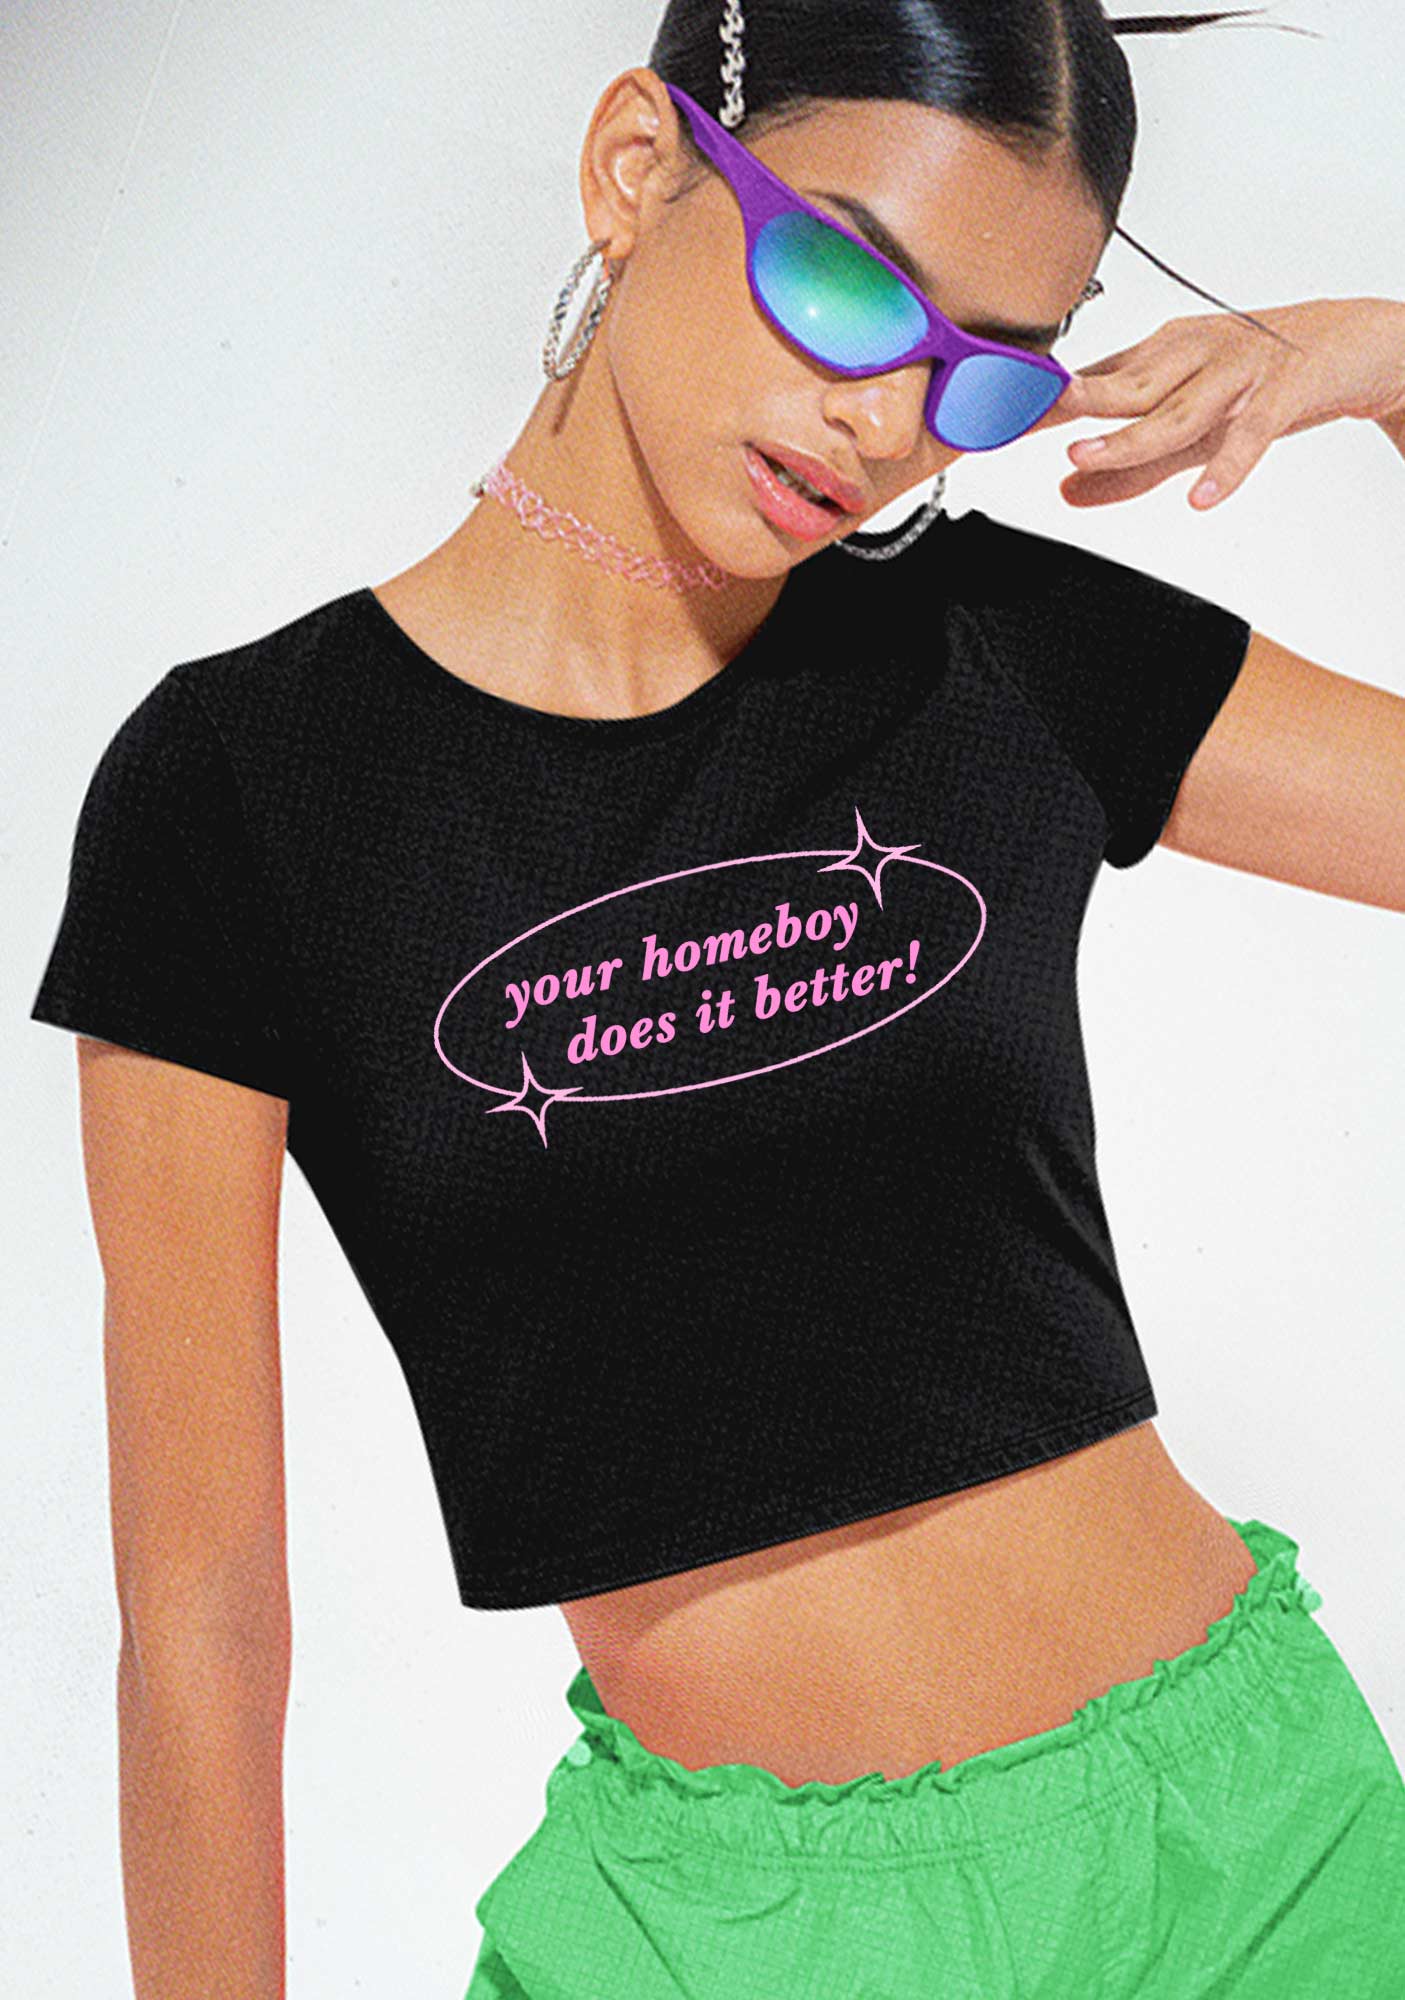 Your Homeboy Does It Better Y2K Baby Tee